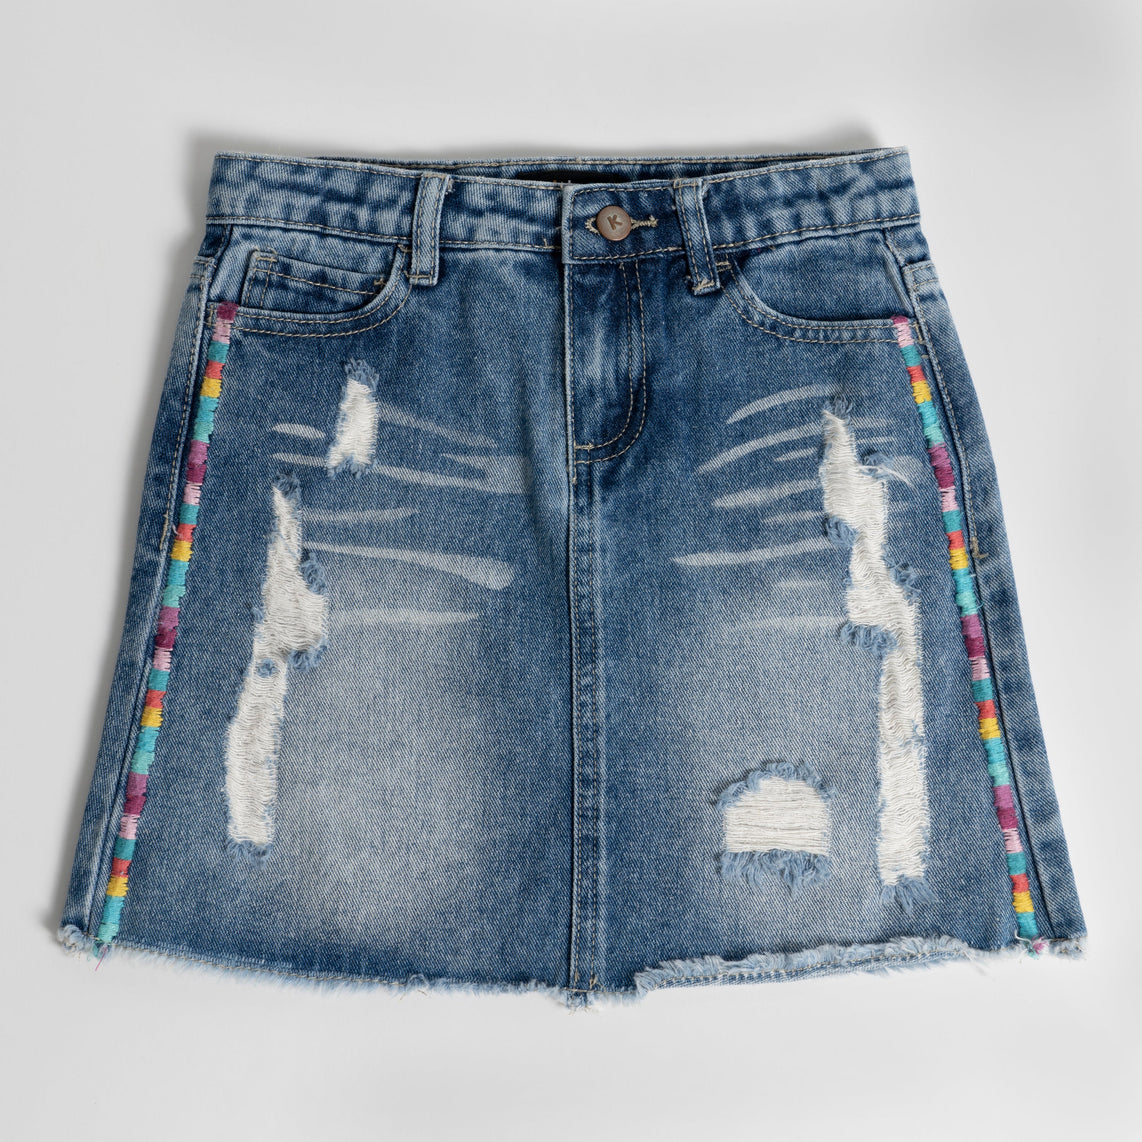 Buy Lilpicks Funky Printed Top With Applique Denim Dungaree Skirt White  Blue (Set of 2) online